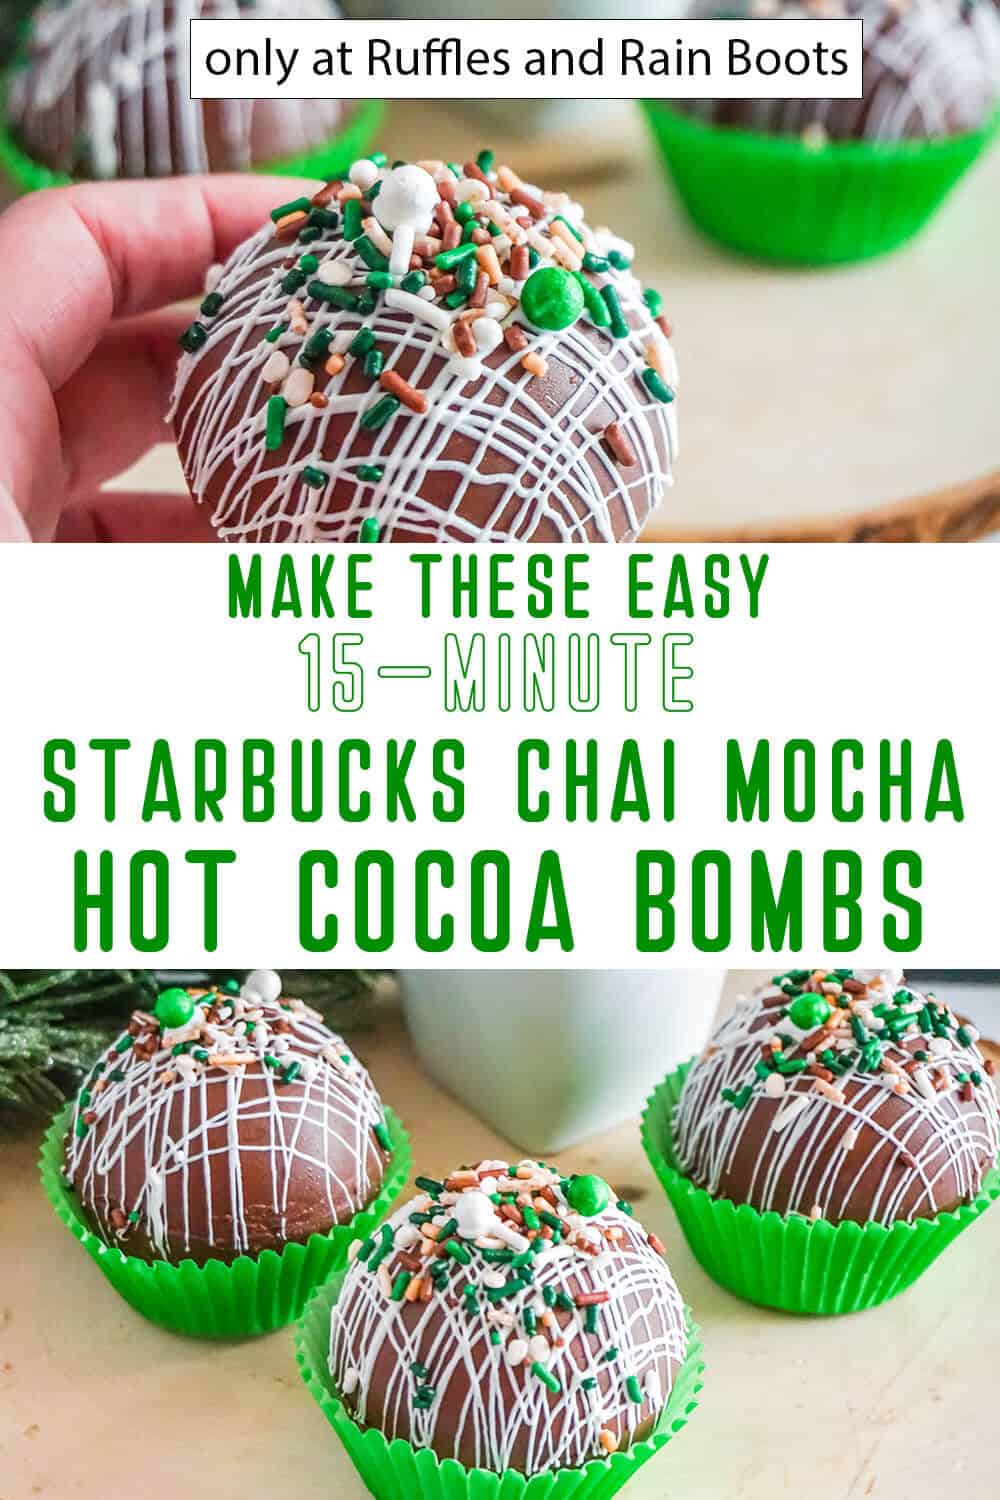 Photo collage of tea infused hot cocoa bombs with text which reads make these easy 15-minute Starbucks chai mocha hot cocoa bombs.